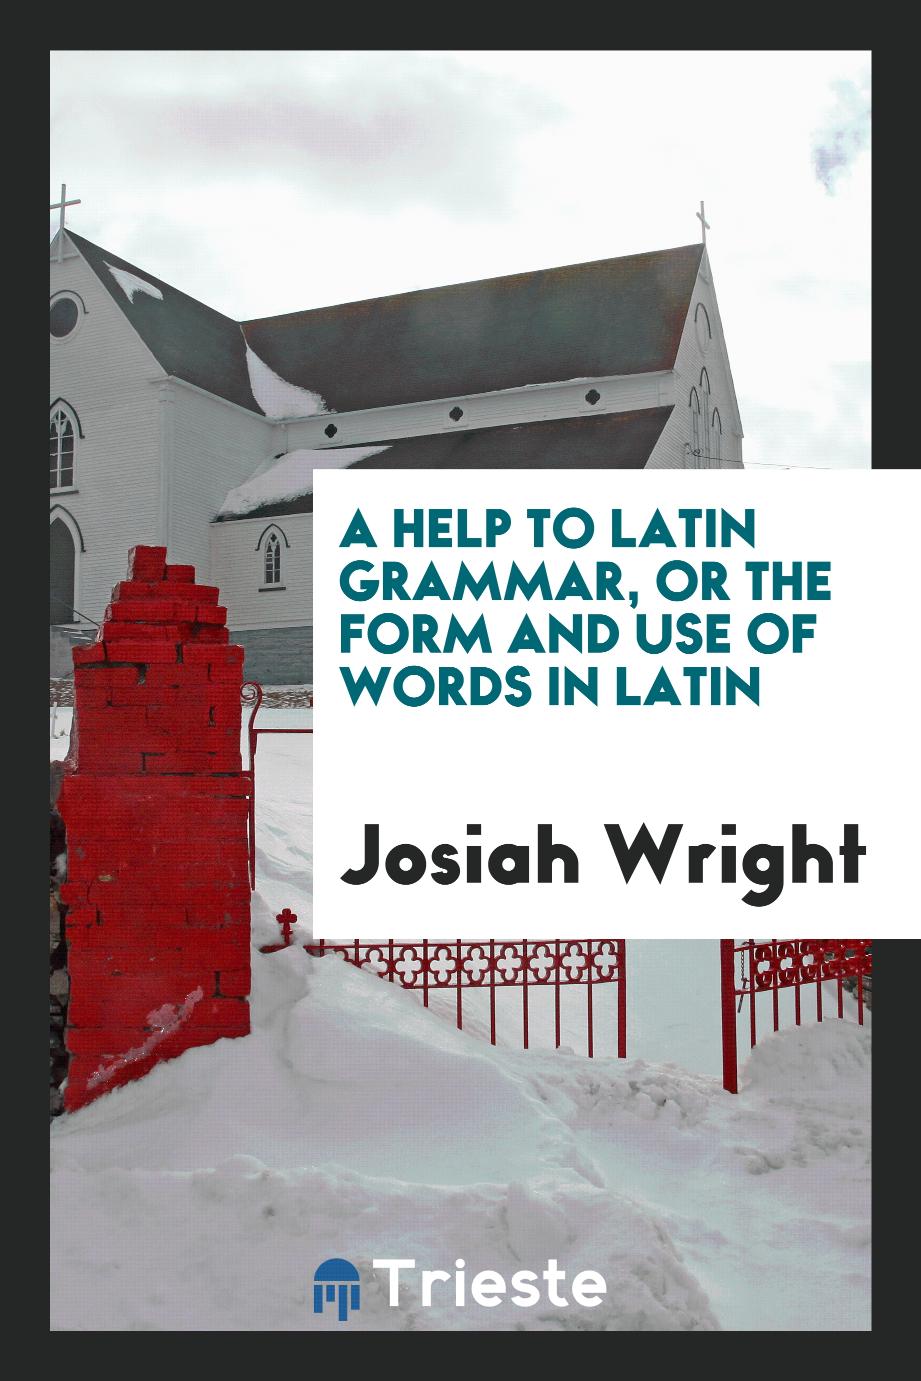 A Help to Latin Grammar, or the Form and Use of Words in Latin